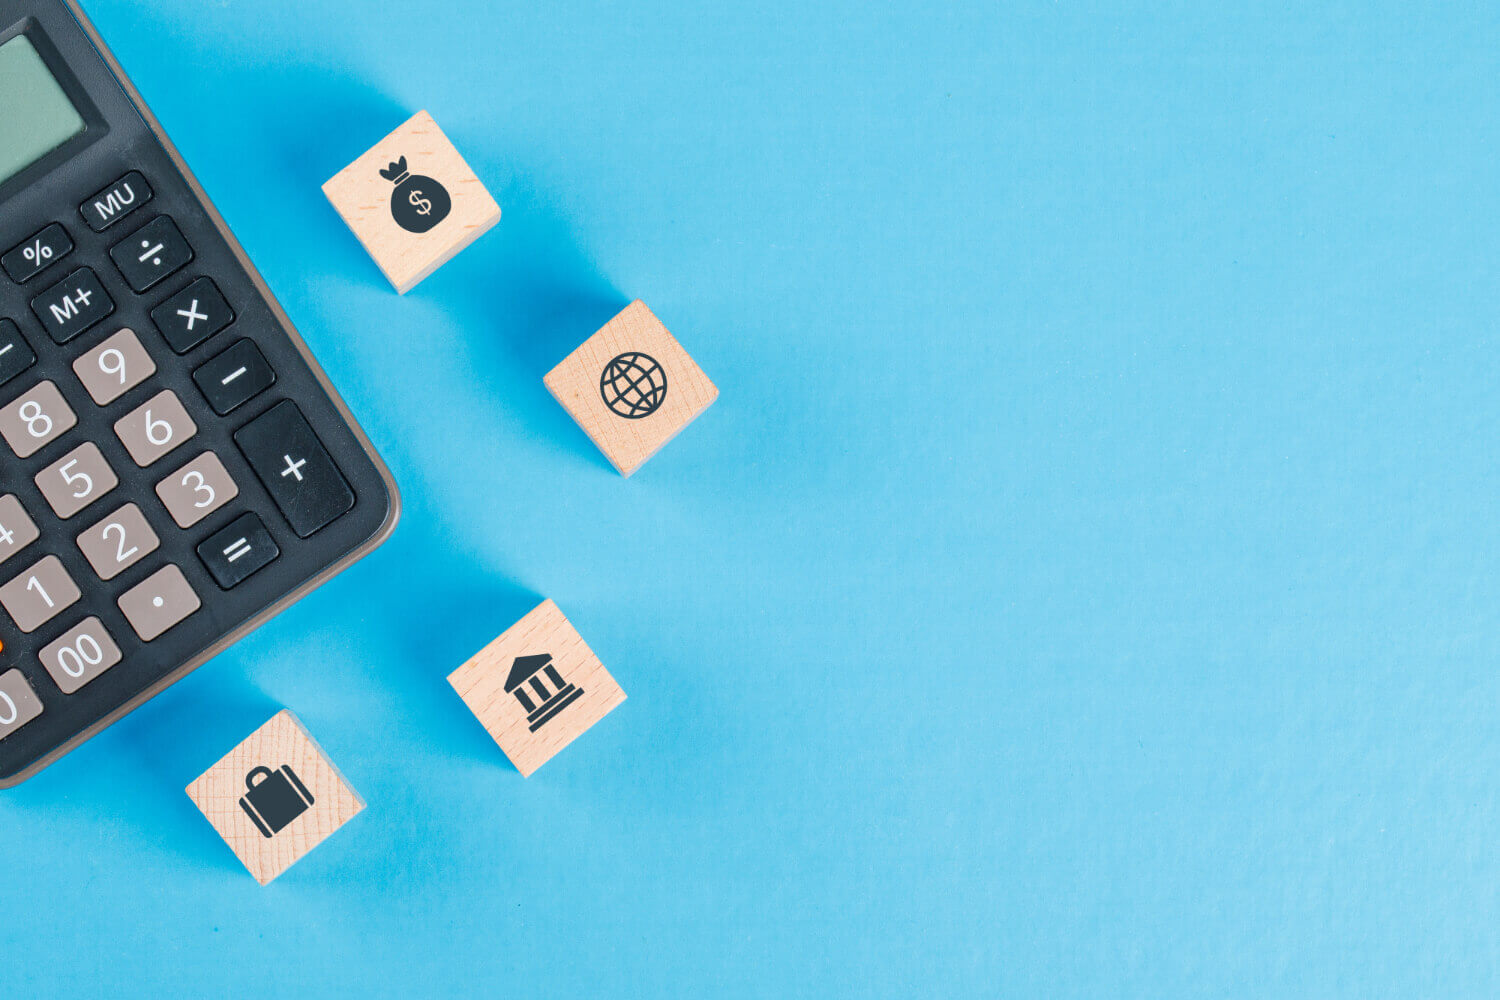 Financial concepts icons illustrated on wooden cubes and a calculator on a blue surface